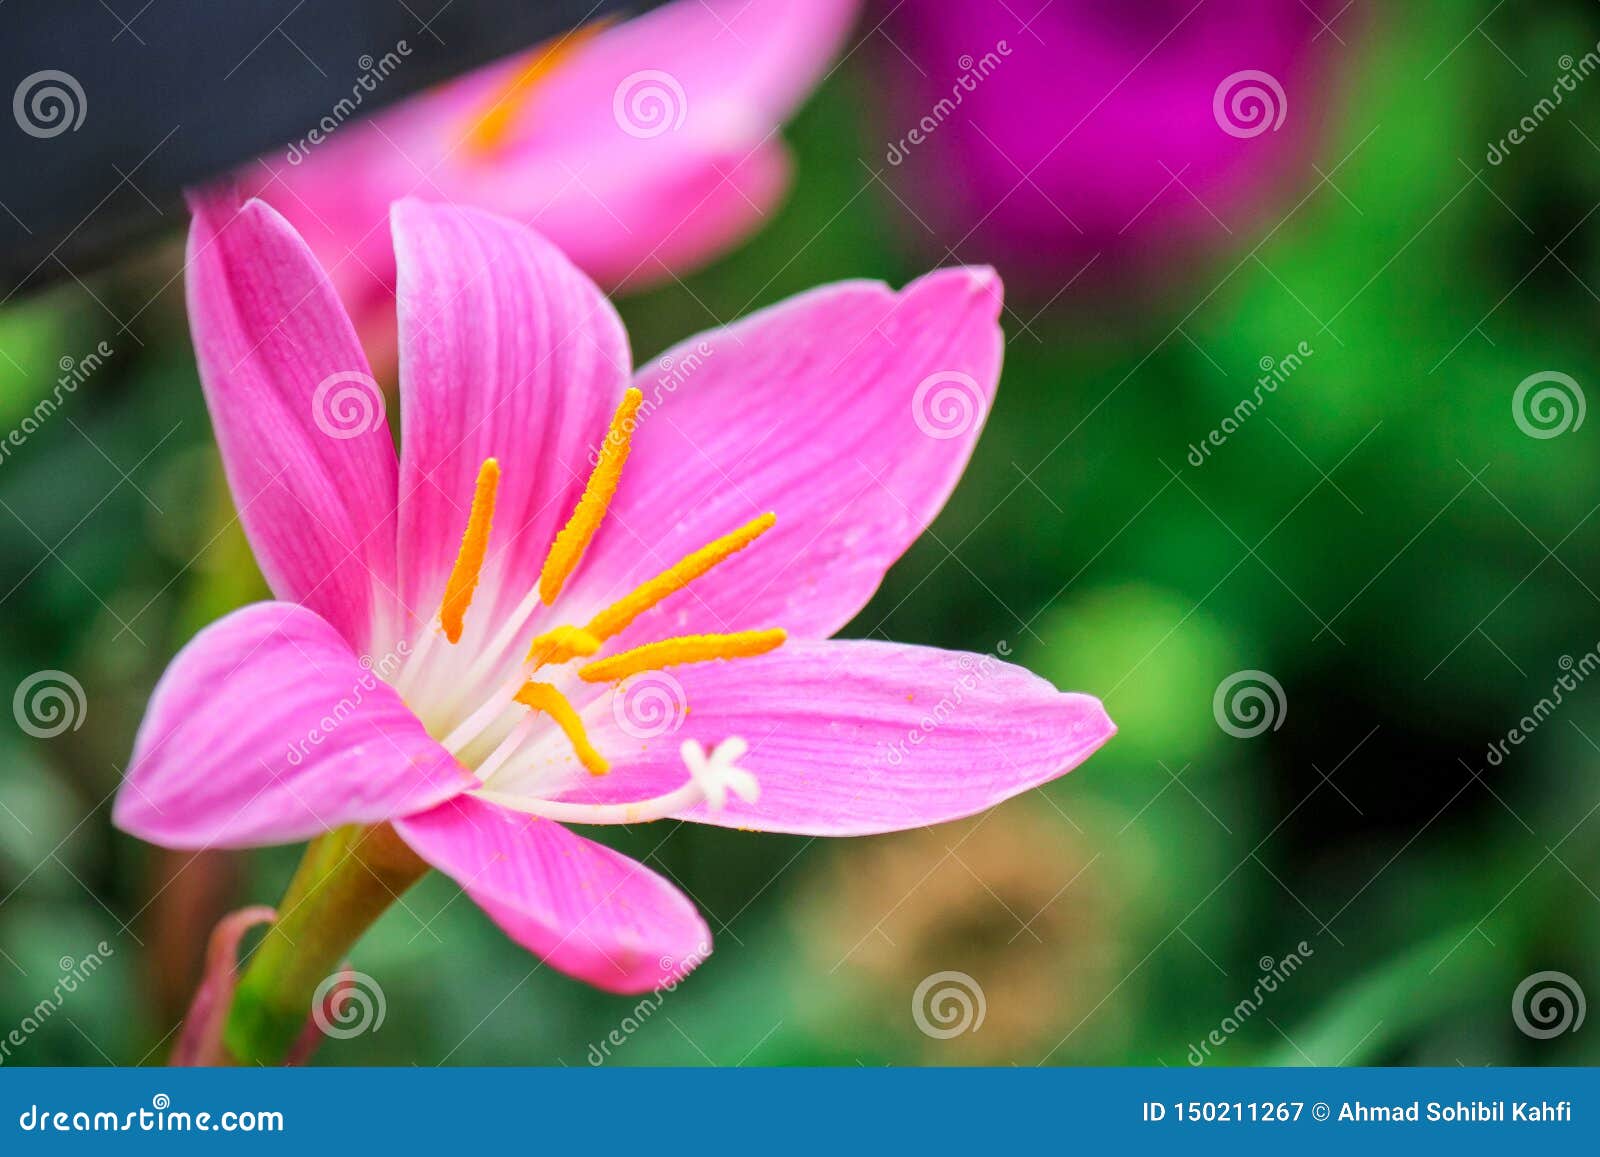 close up of beautiful red pink color flower around green leaves in a garden